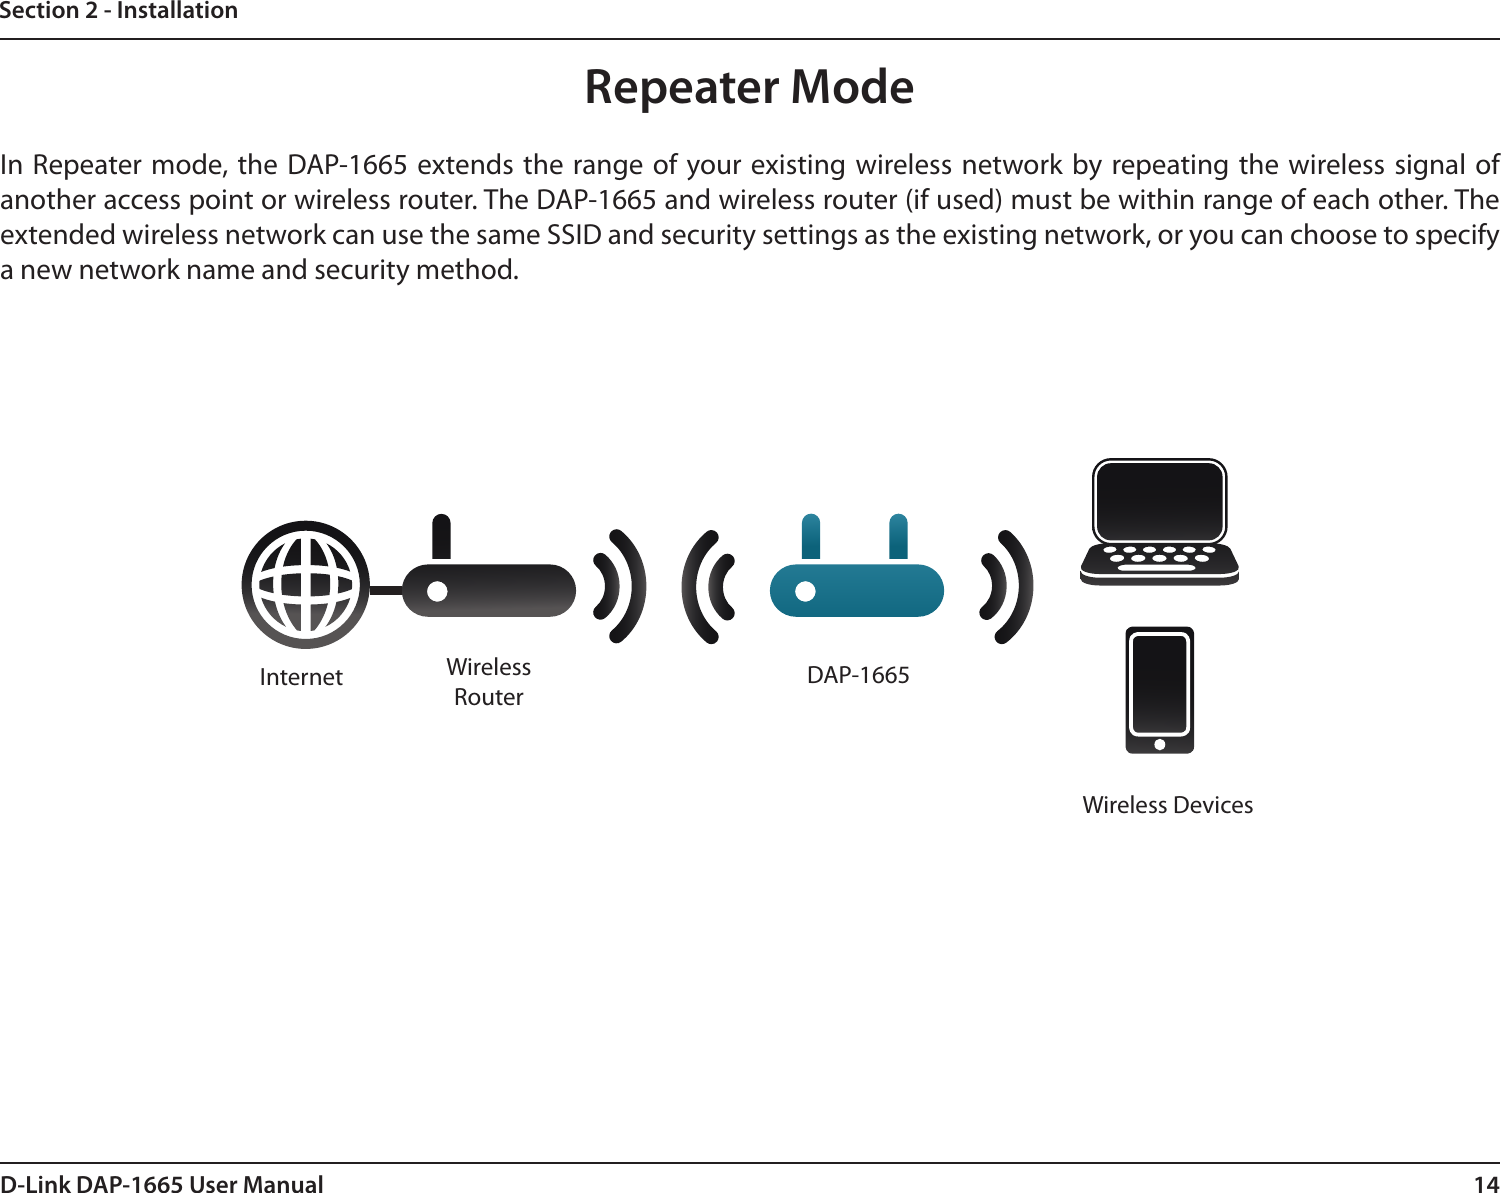 14D-Link DAP-1665 User ManualSection 2 - InstallationRepeater ModeIn Repeater mode, the DAP-1665 extends the range of your existing wireless network by repeating the wireless signal of another access point or wireless router. The DAP-1665 and wireless router (if used) must be within range of each other. The extended wireless network can use the same SSID and security settings as the existing network, or you can choose to specify a new network name and security method.Internet DAP-1665Wireless RouterWireless Devices